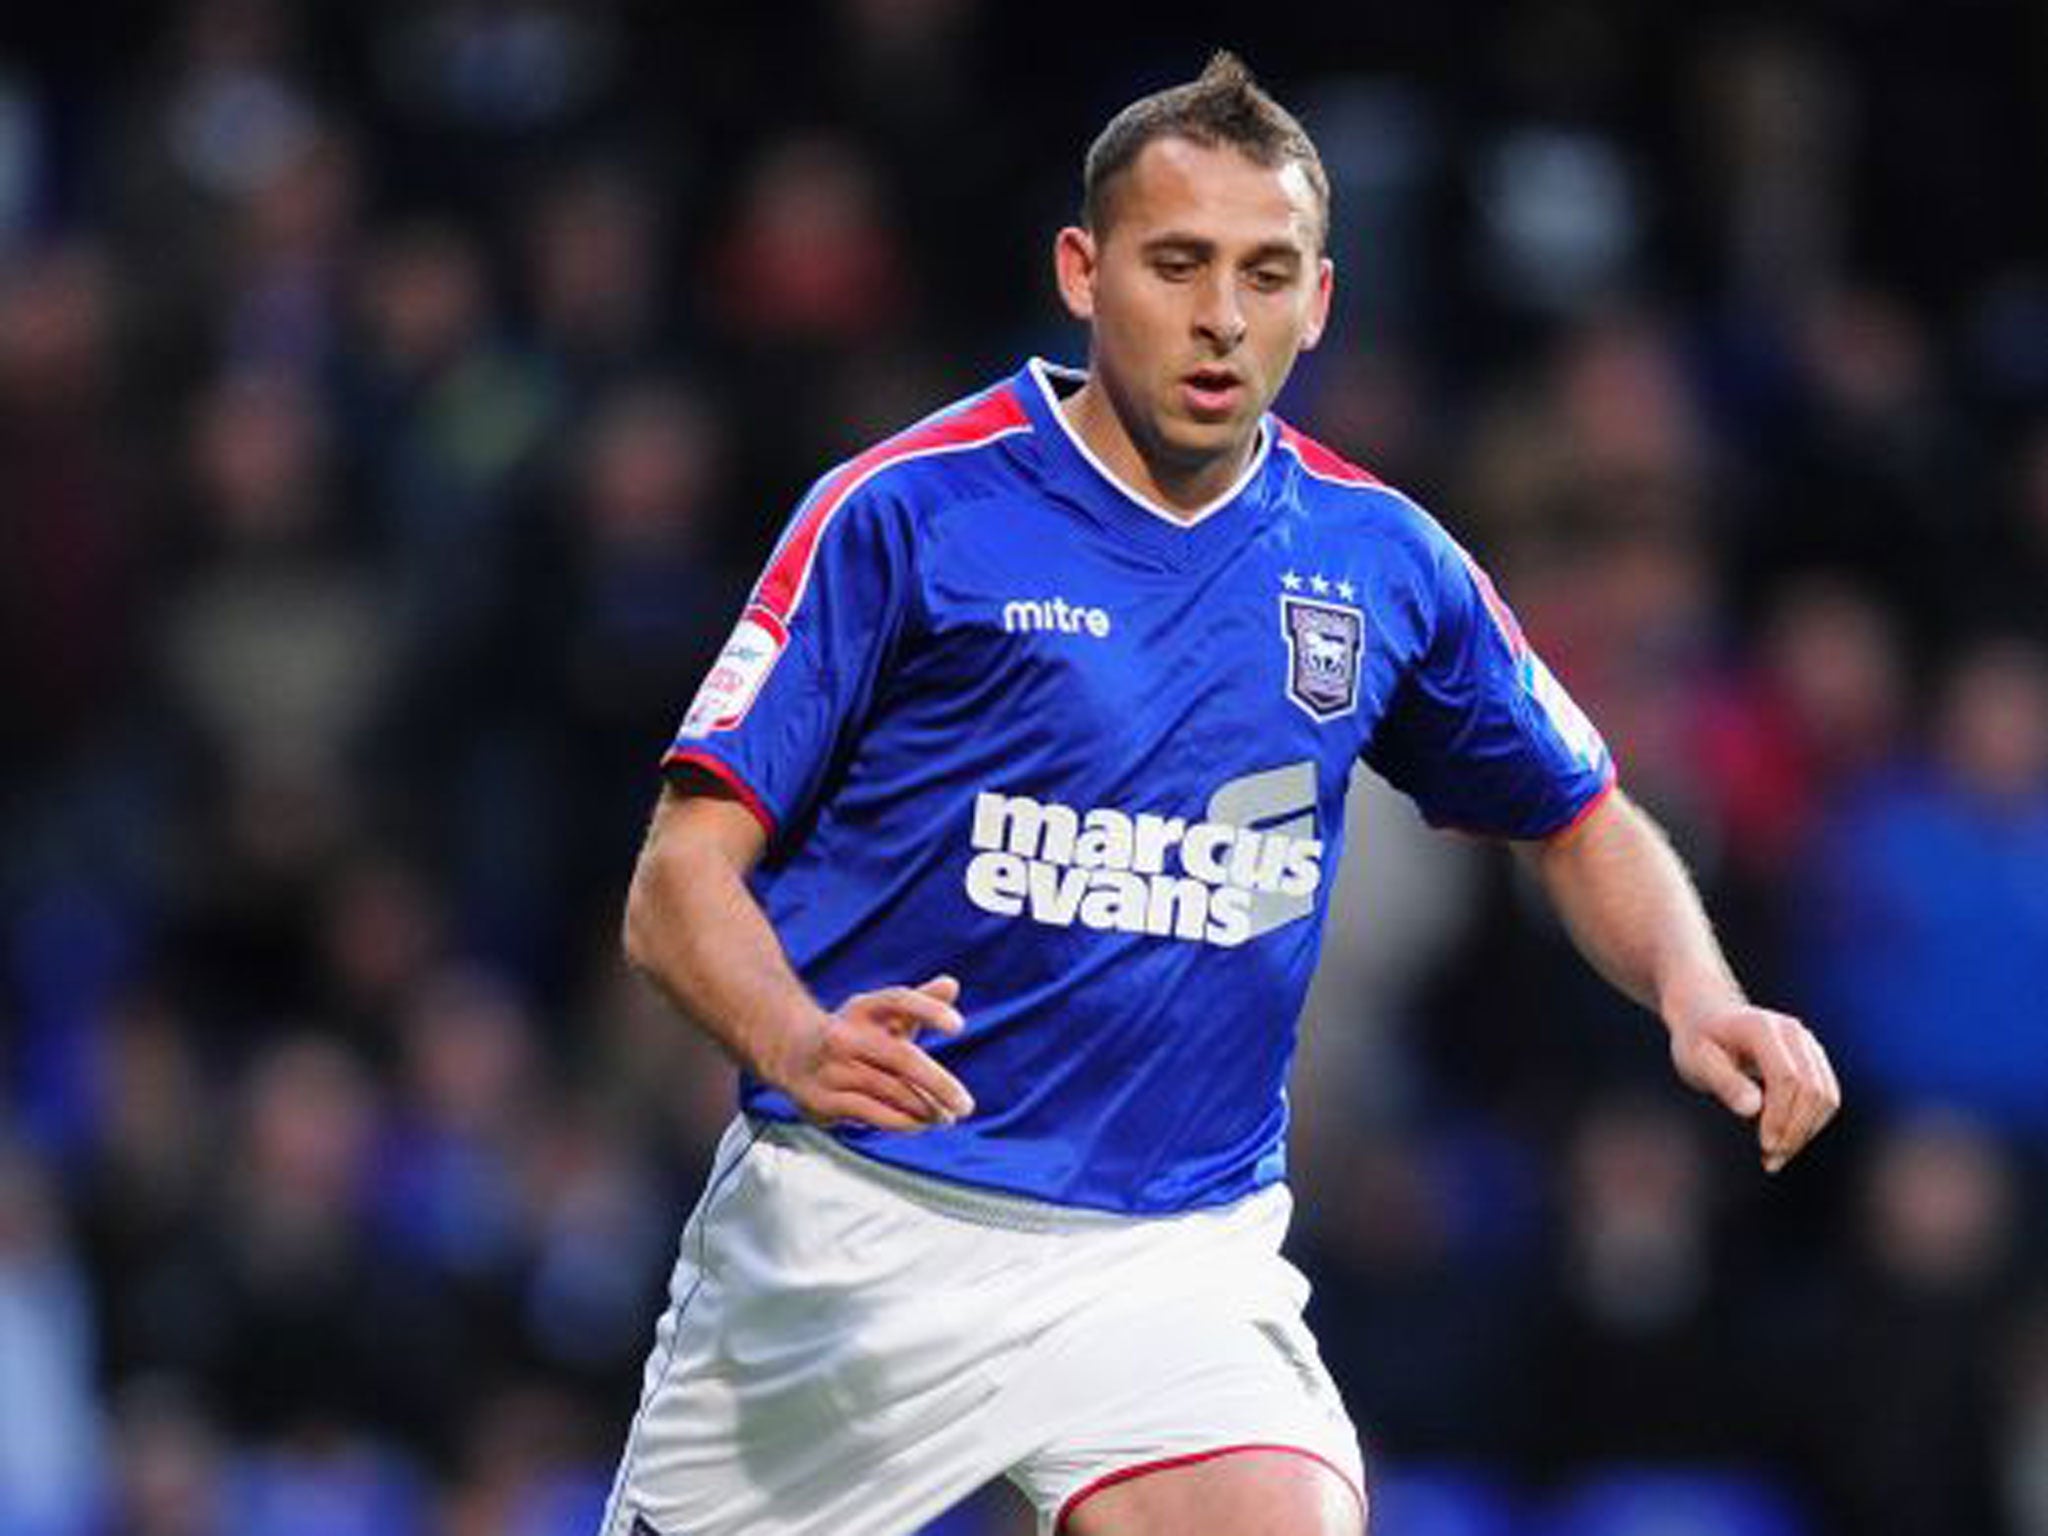 Michael Chopra claims he cannot afford to pay the legal fees